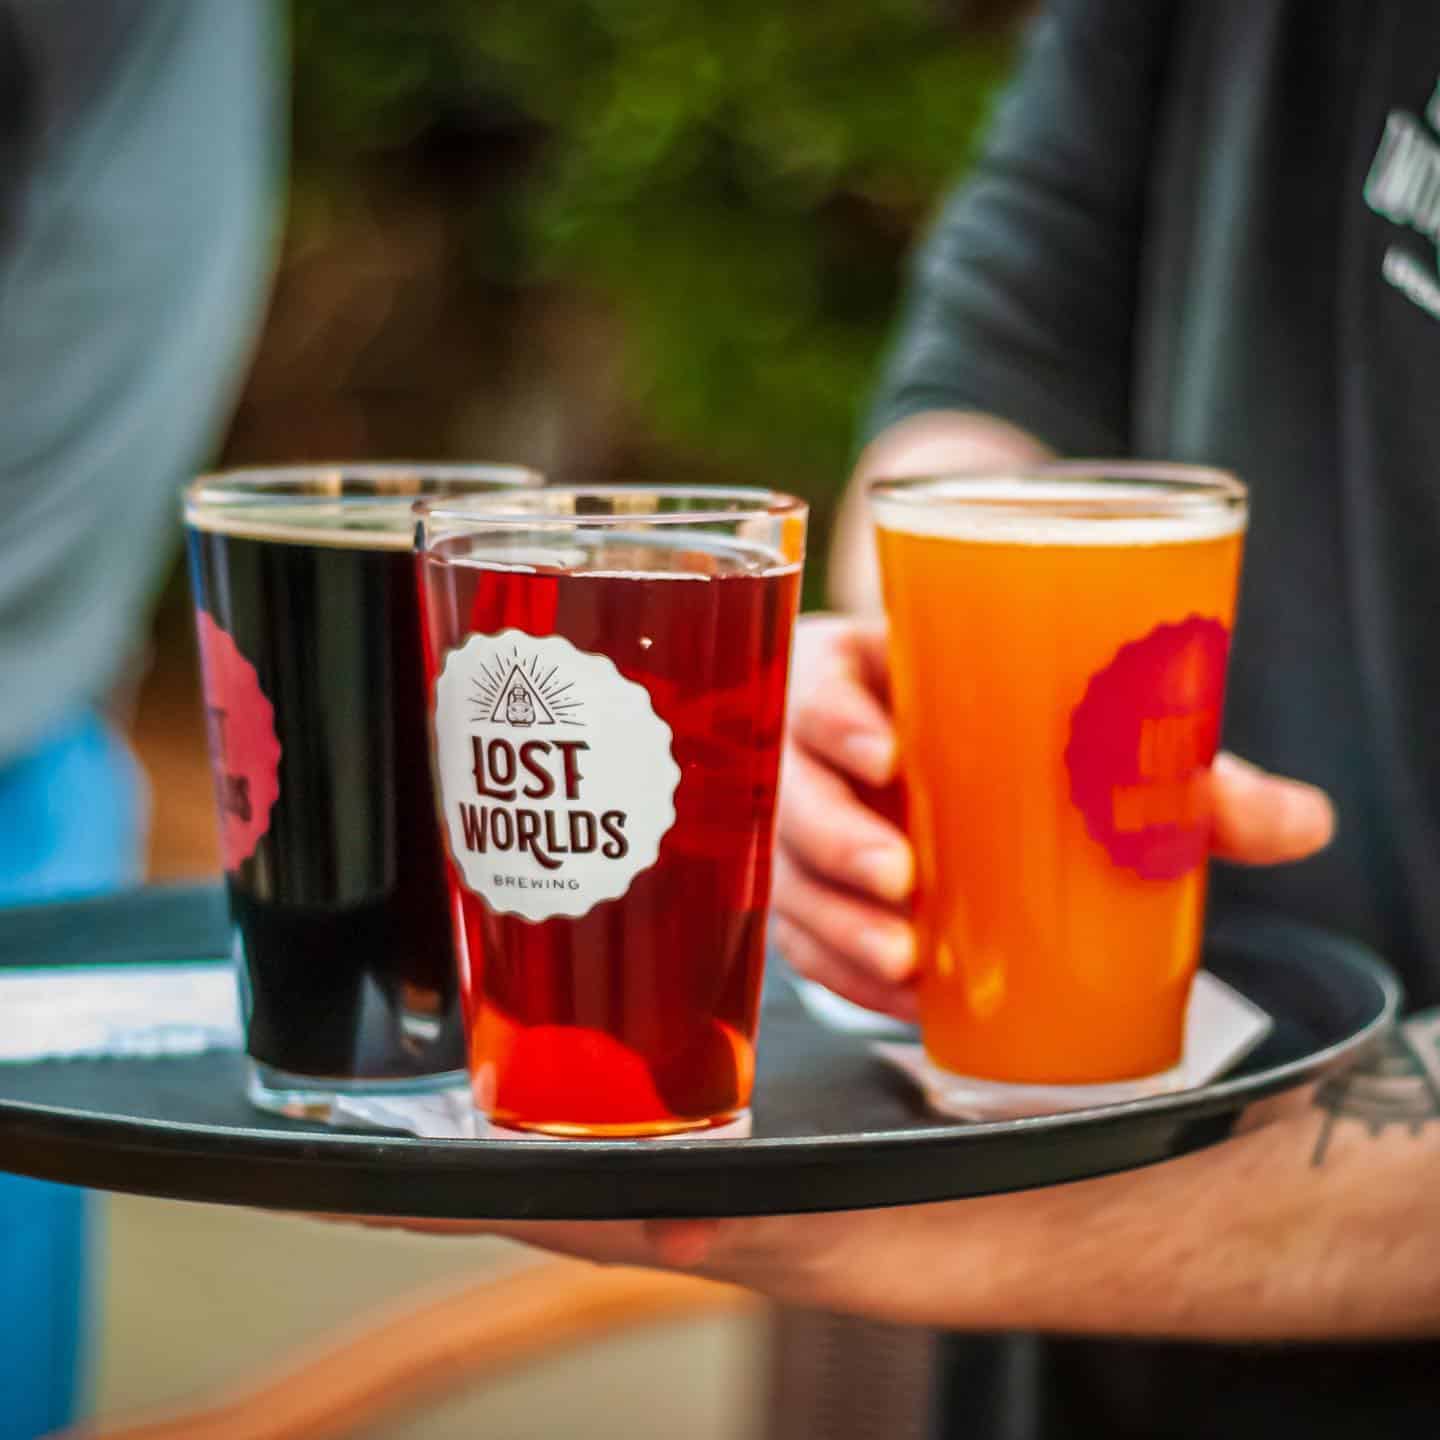 Anyone else getting excited for @lostworldsbrewing to open up at Met? 

Coming Winter 2023, and we can't wait. Located right along the Sugar Creek Greenway, it'll be the perfect spot to sip a brew and enjoy the view.